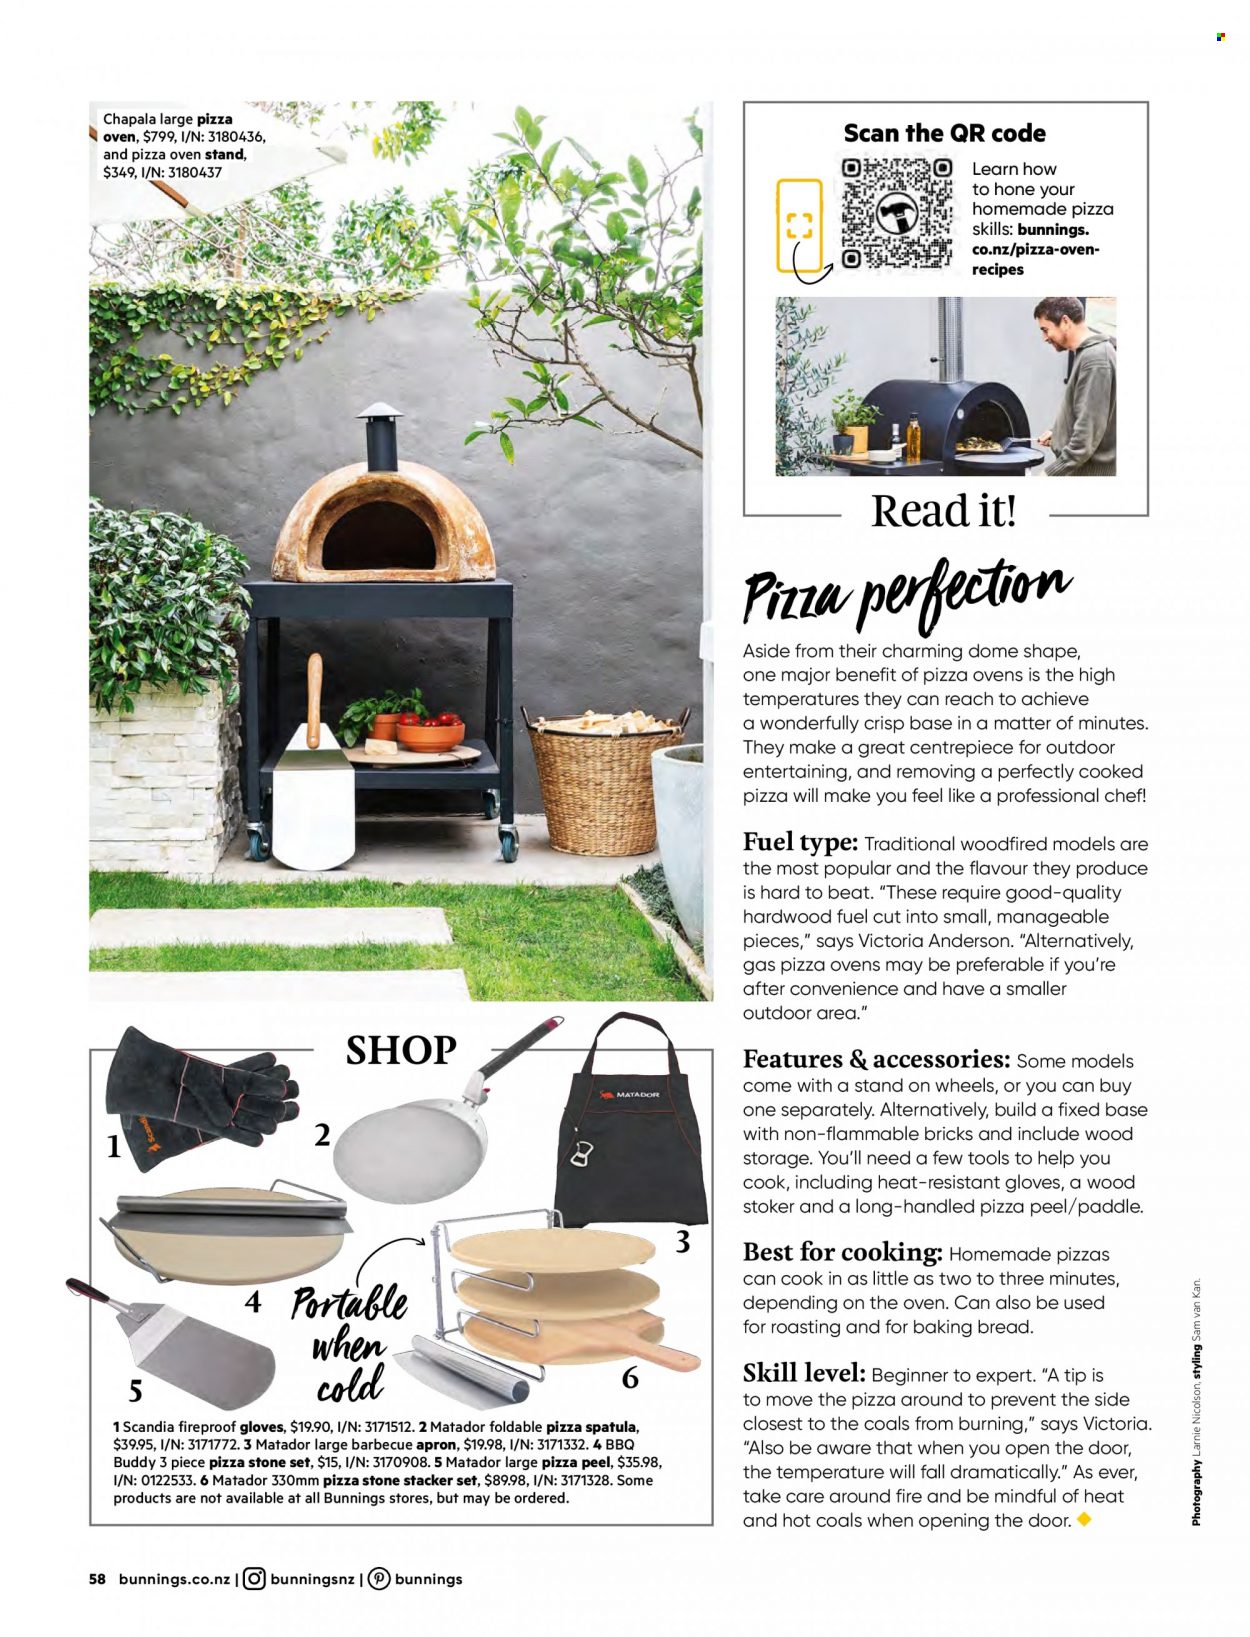 thumbnail - Bunnings Warehouse mailer - Sales products - spatula, pizza oven, door. Page 58.